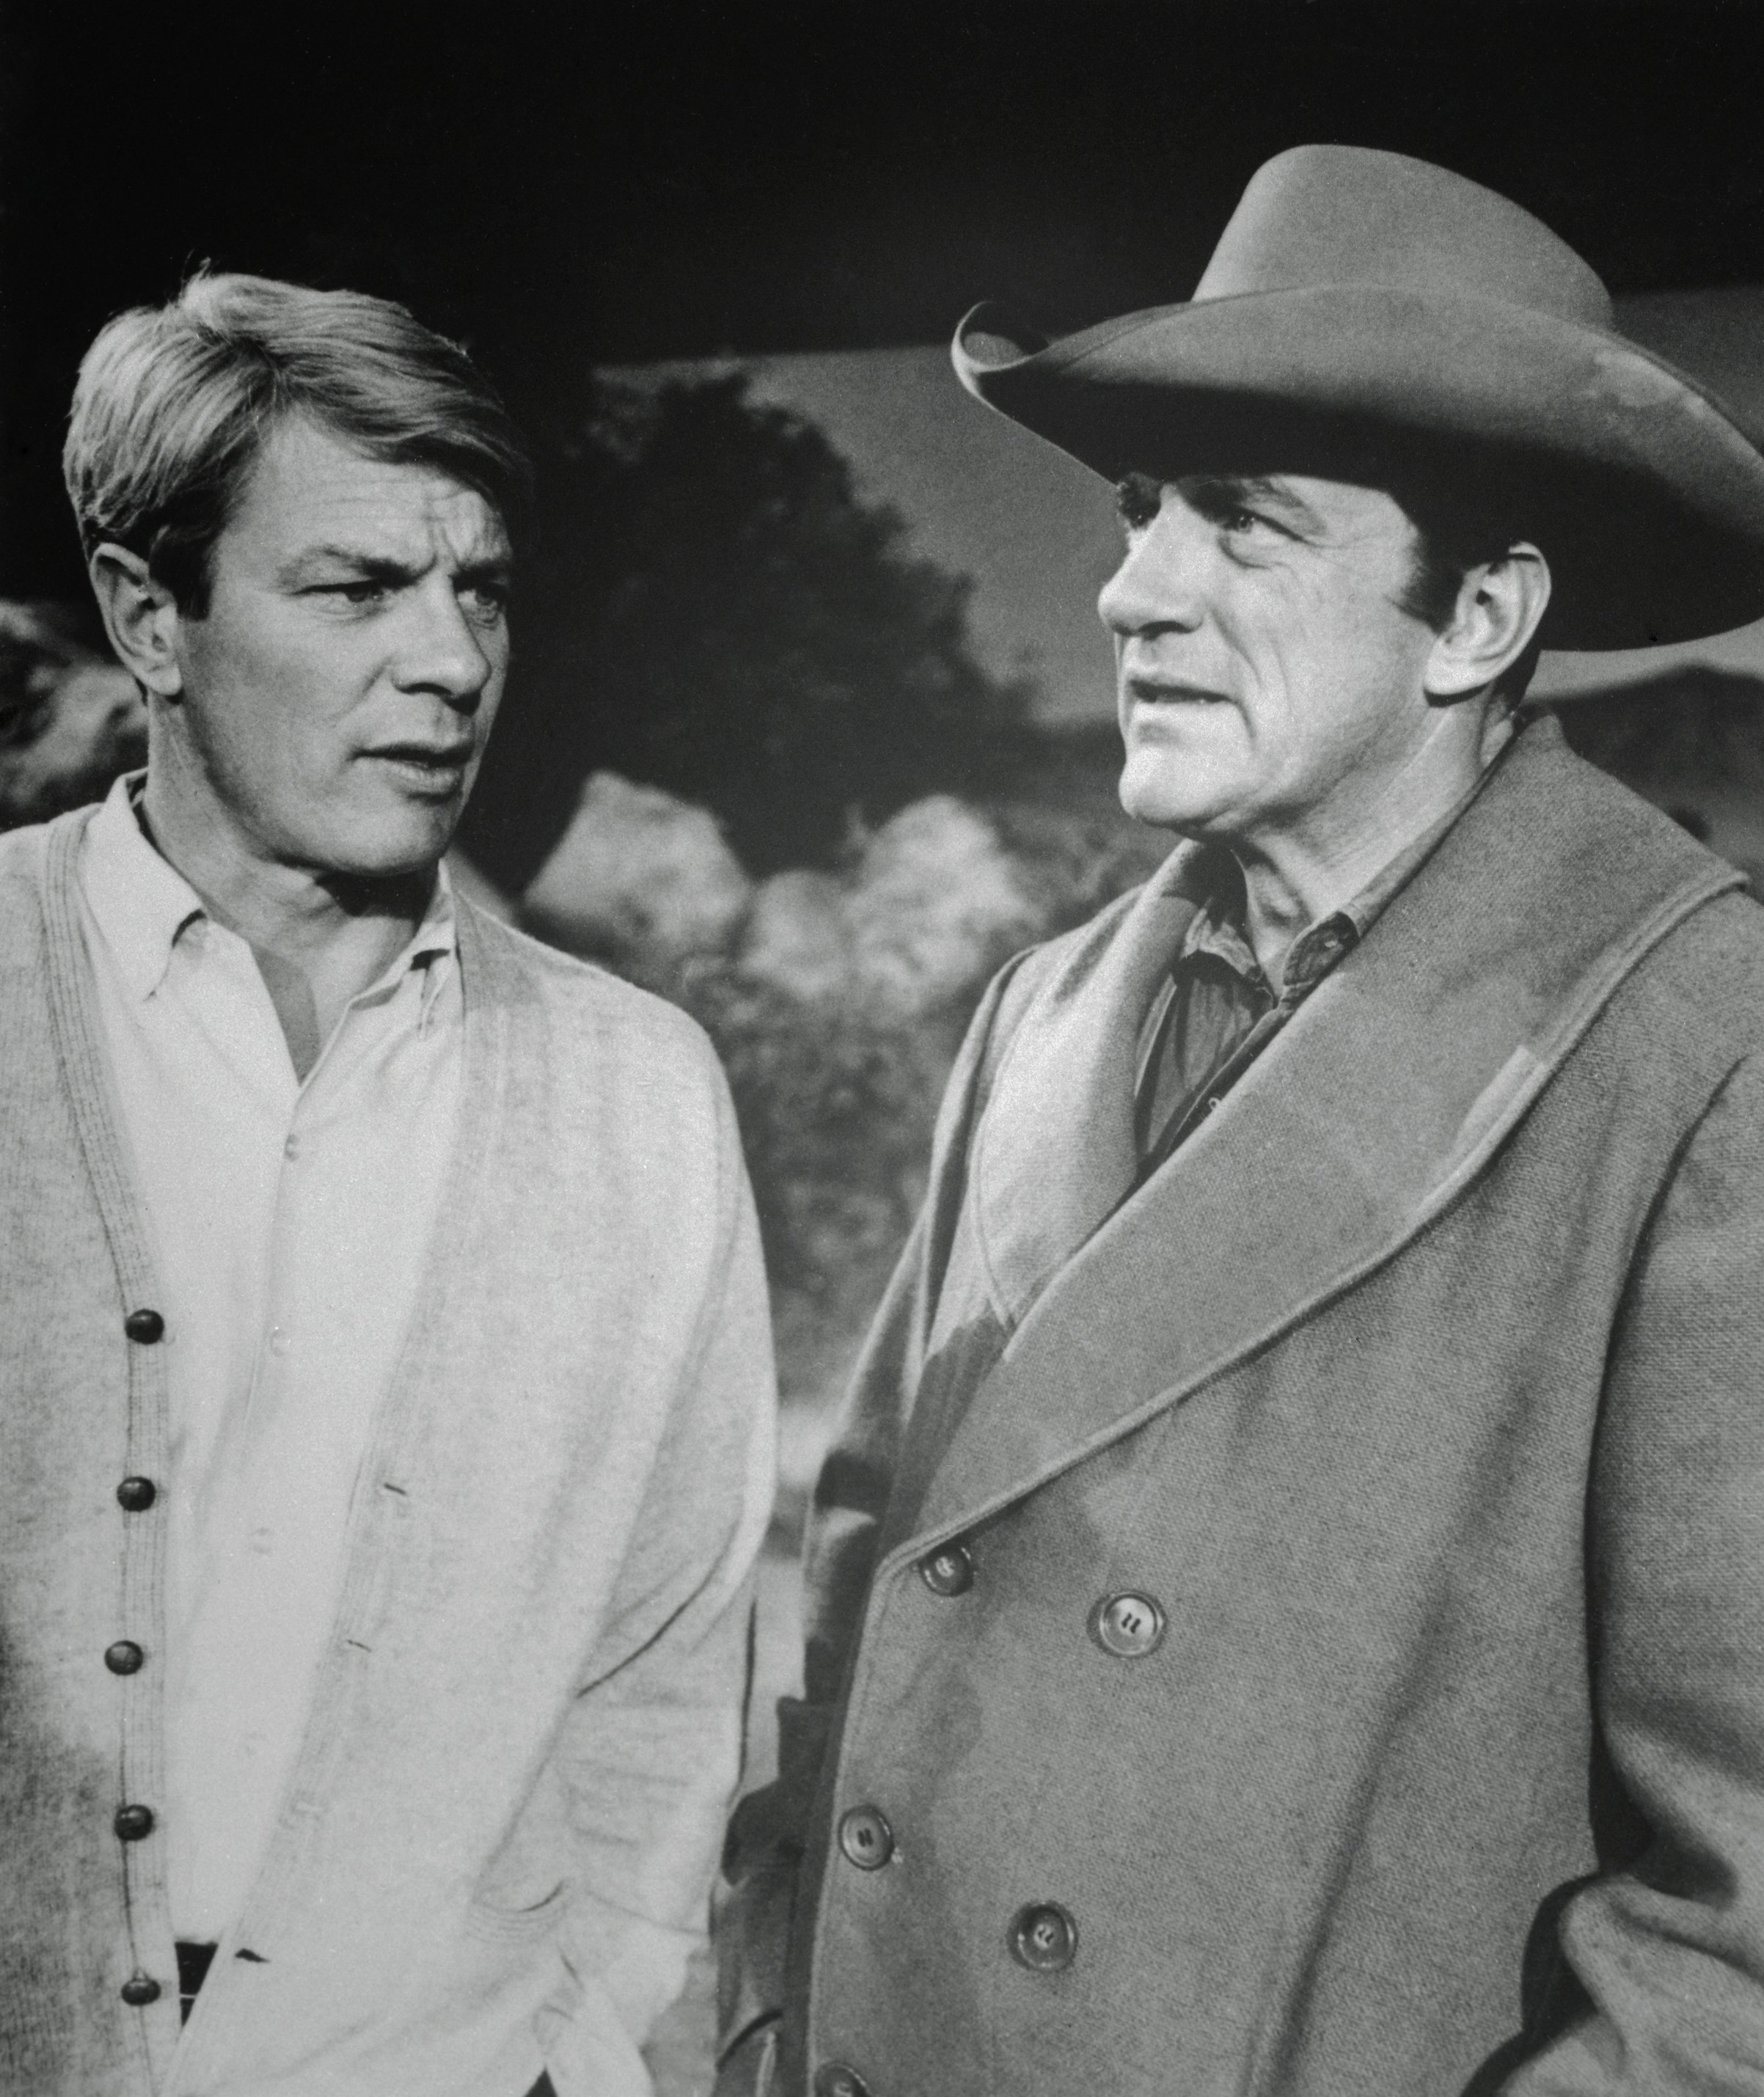 Actor James Arness (right) with his brother, actor Peter Graves. | Source: Getty Images